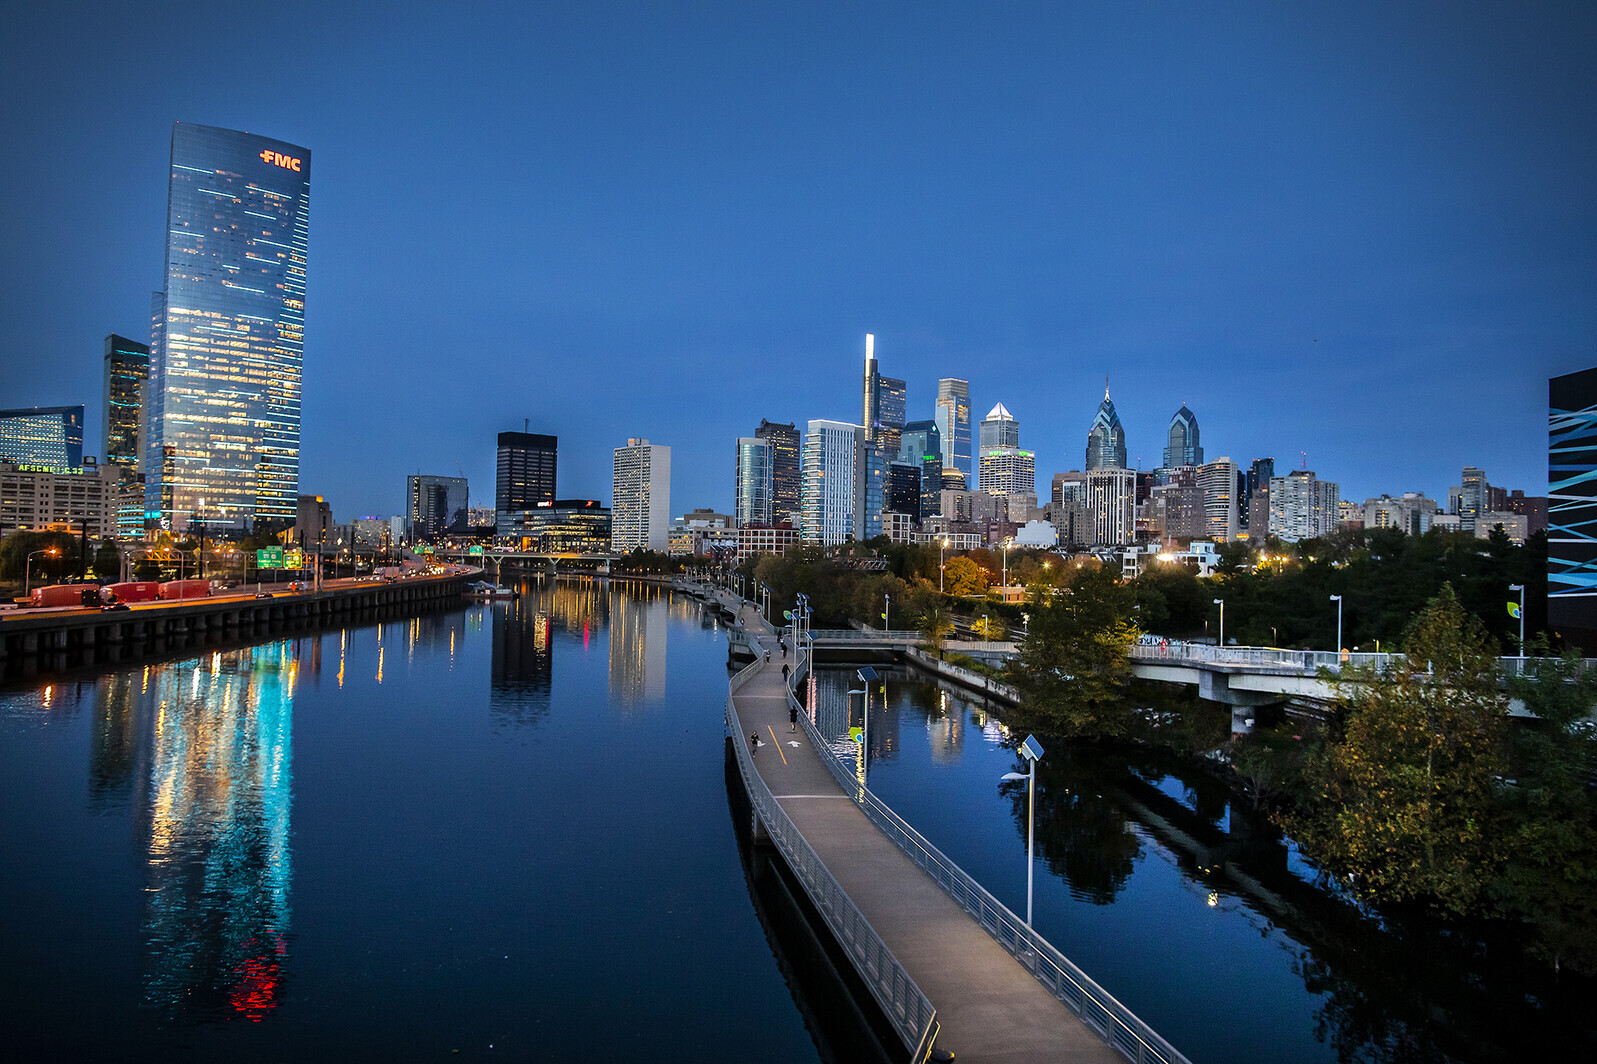 Nighttime skyline of the Schuylkill River Trail